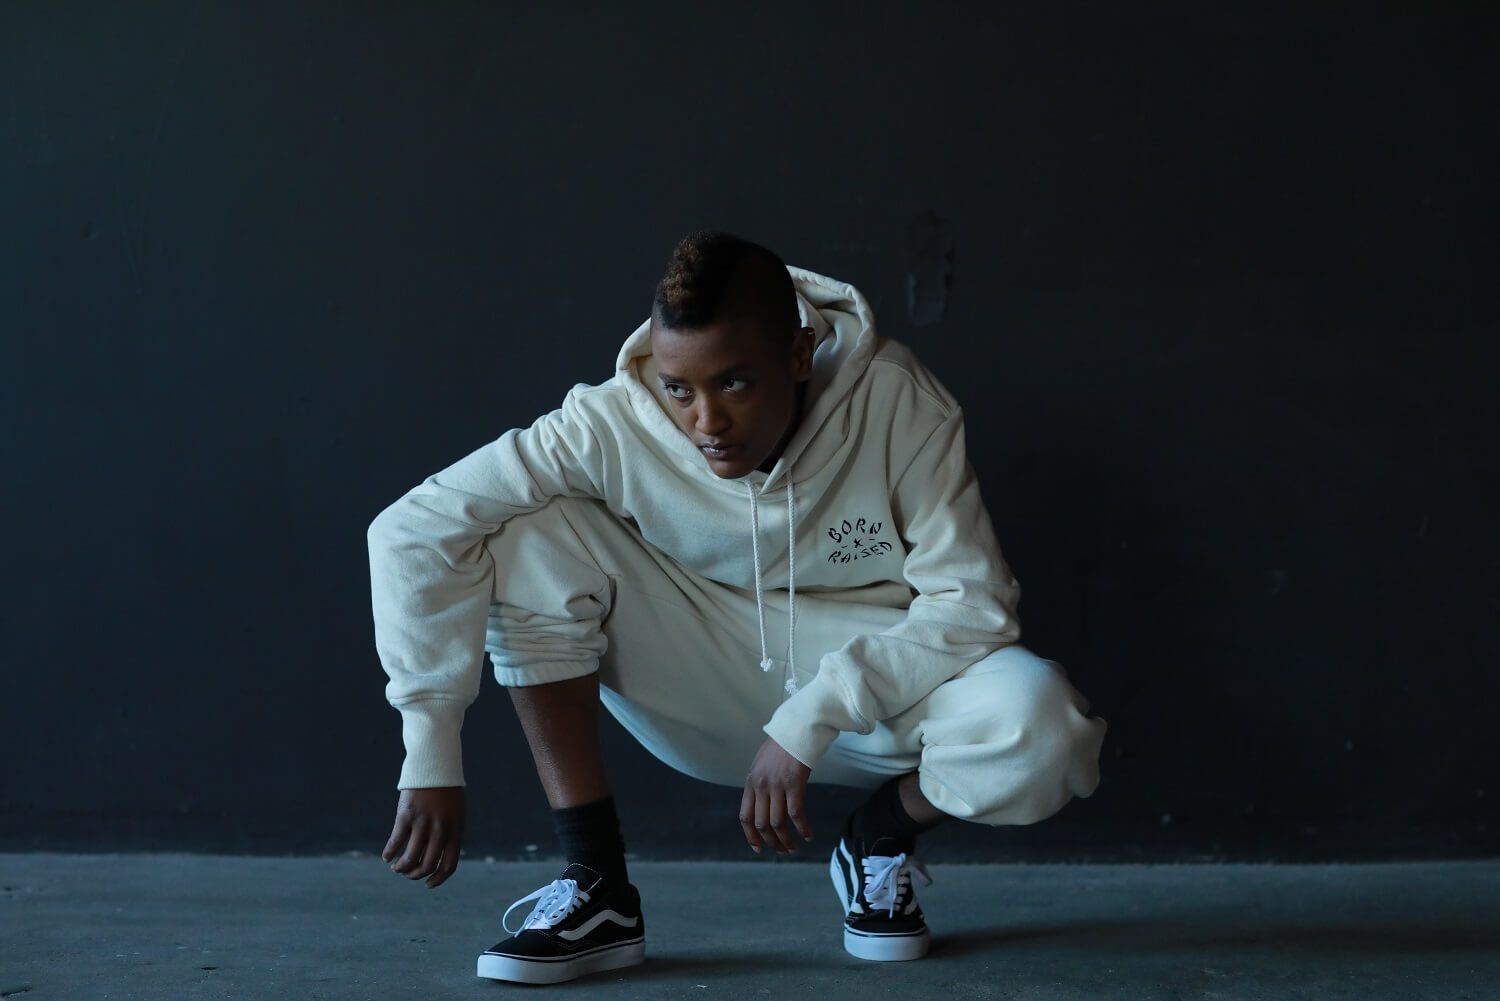 Syd goes solo, released debut LP Fin